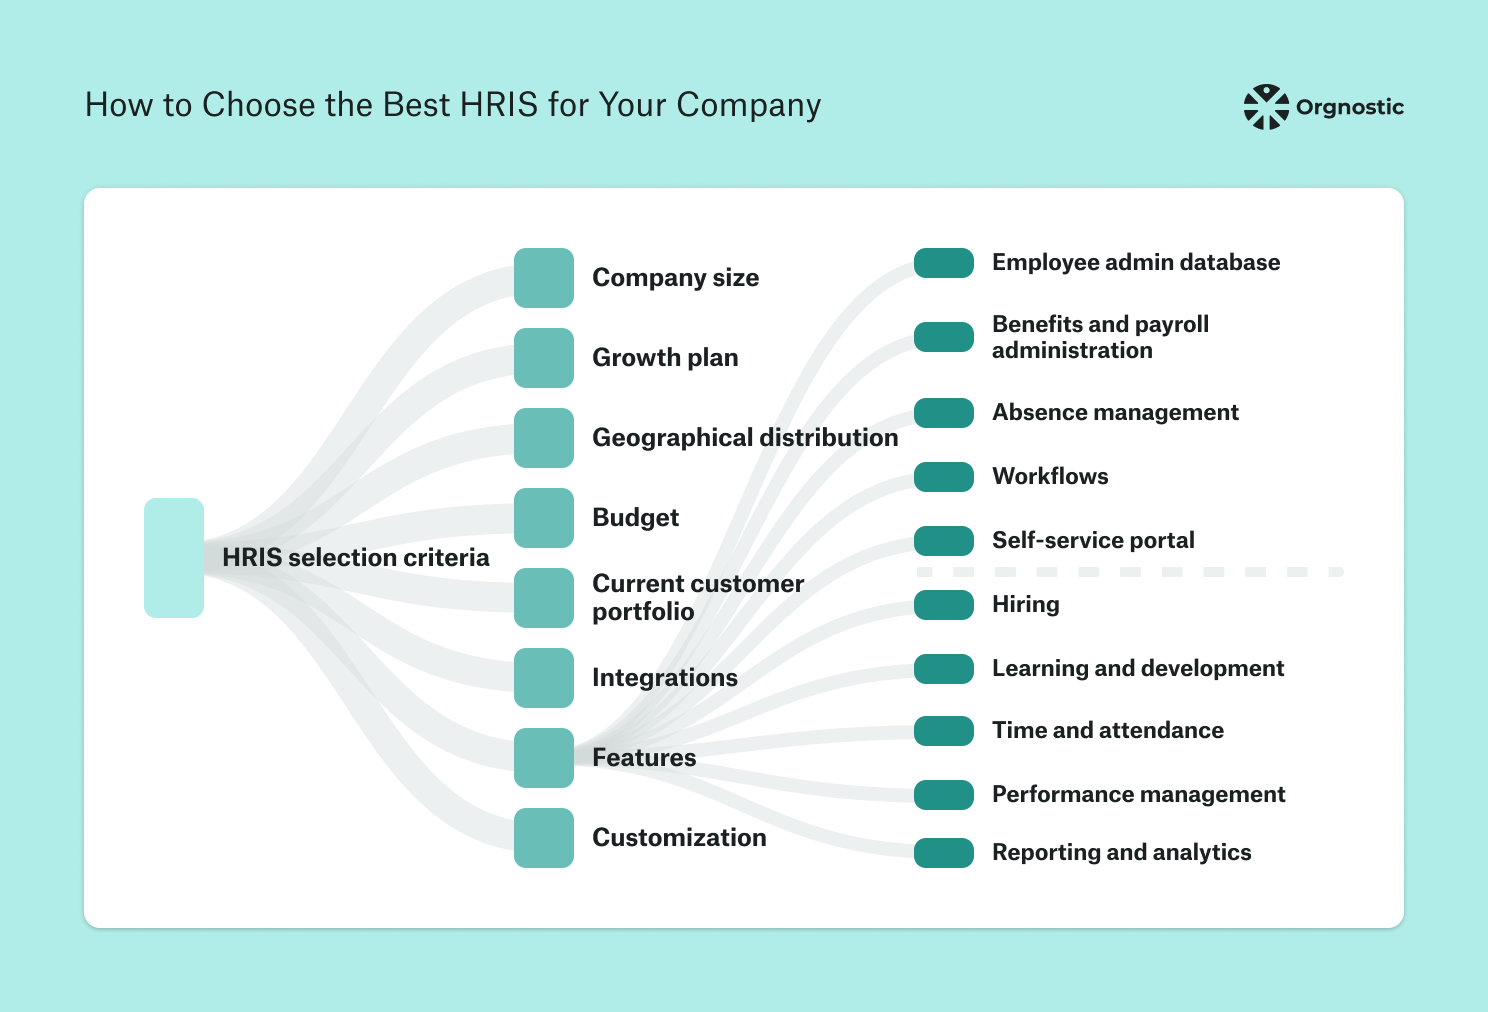 How to Choose the Best HRIS - HRIS selection criteria